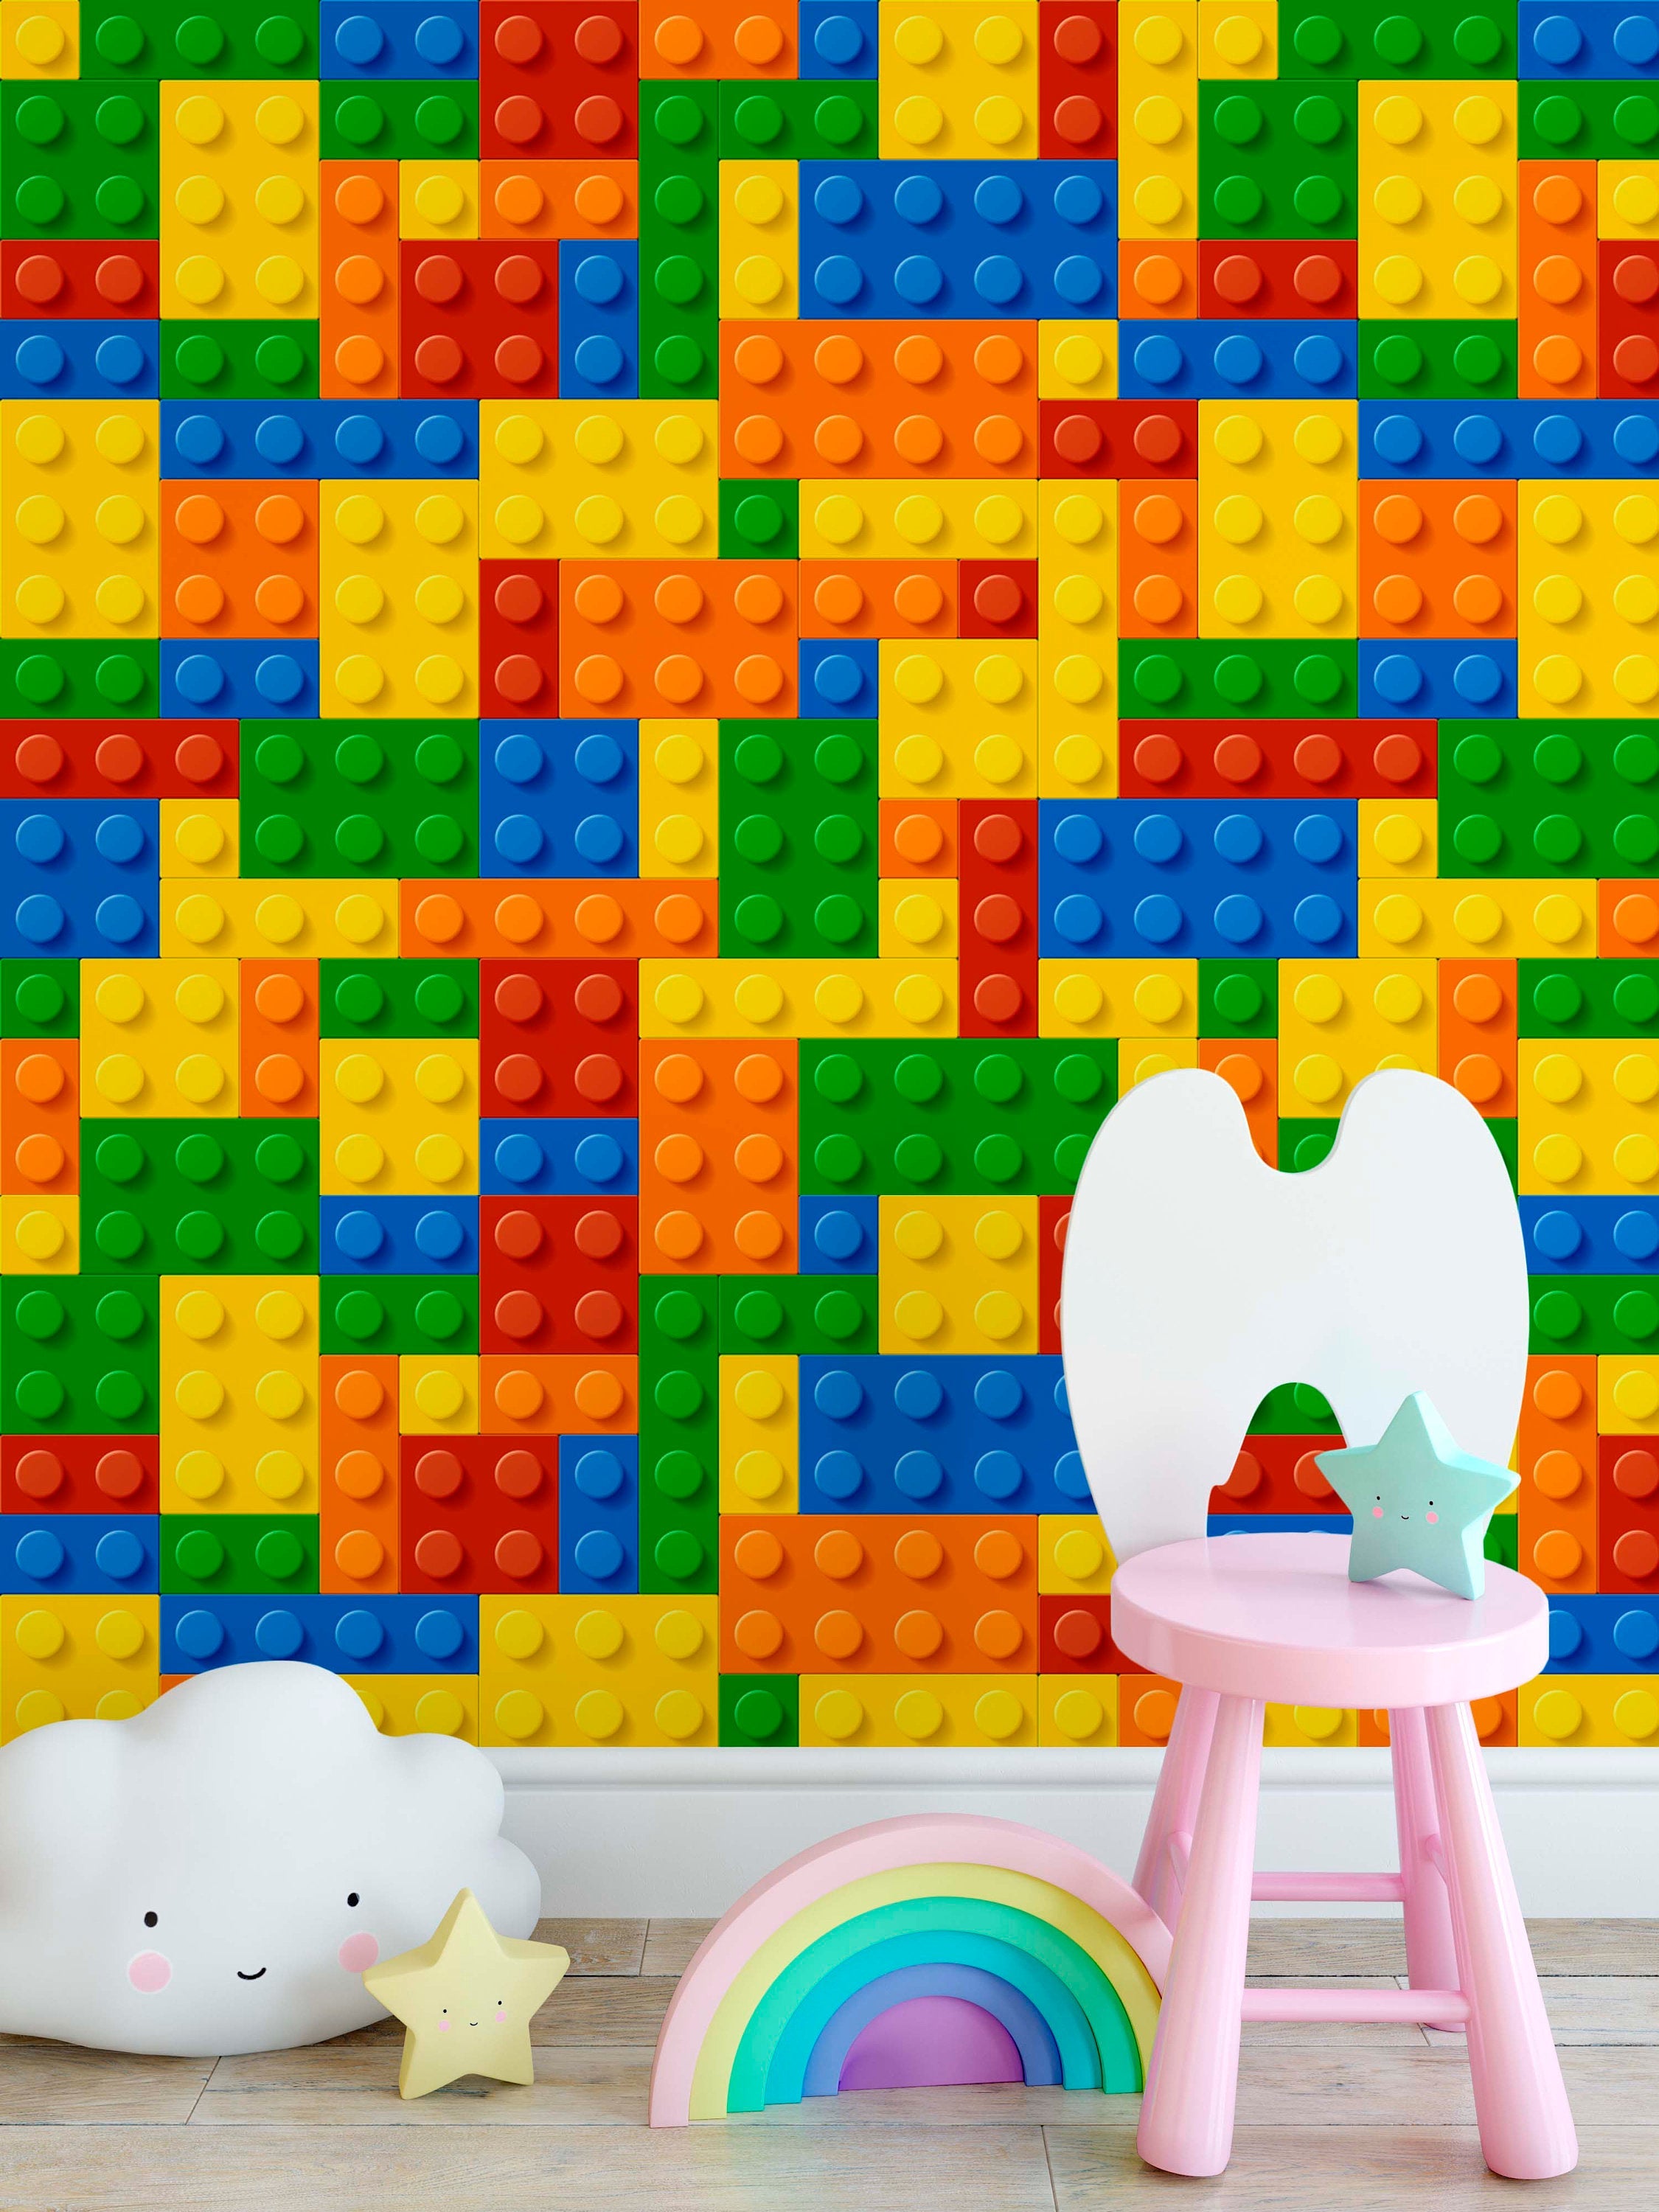 Colorful Lego's Looking Wallpaper Nursey Bedroom Children Kids Room Mural Home Decor Wall Art Removable